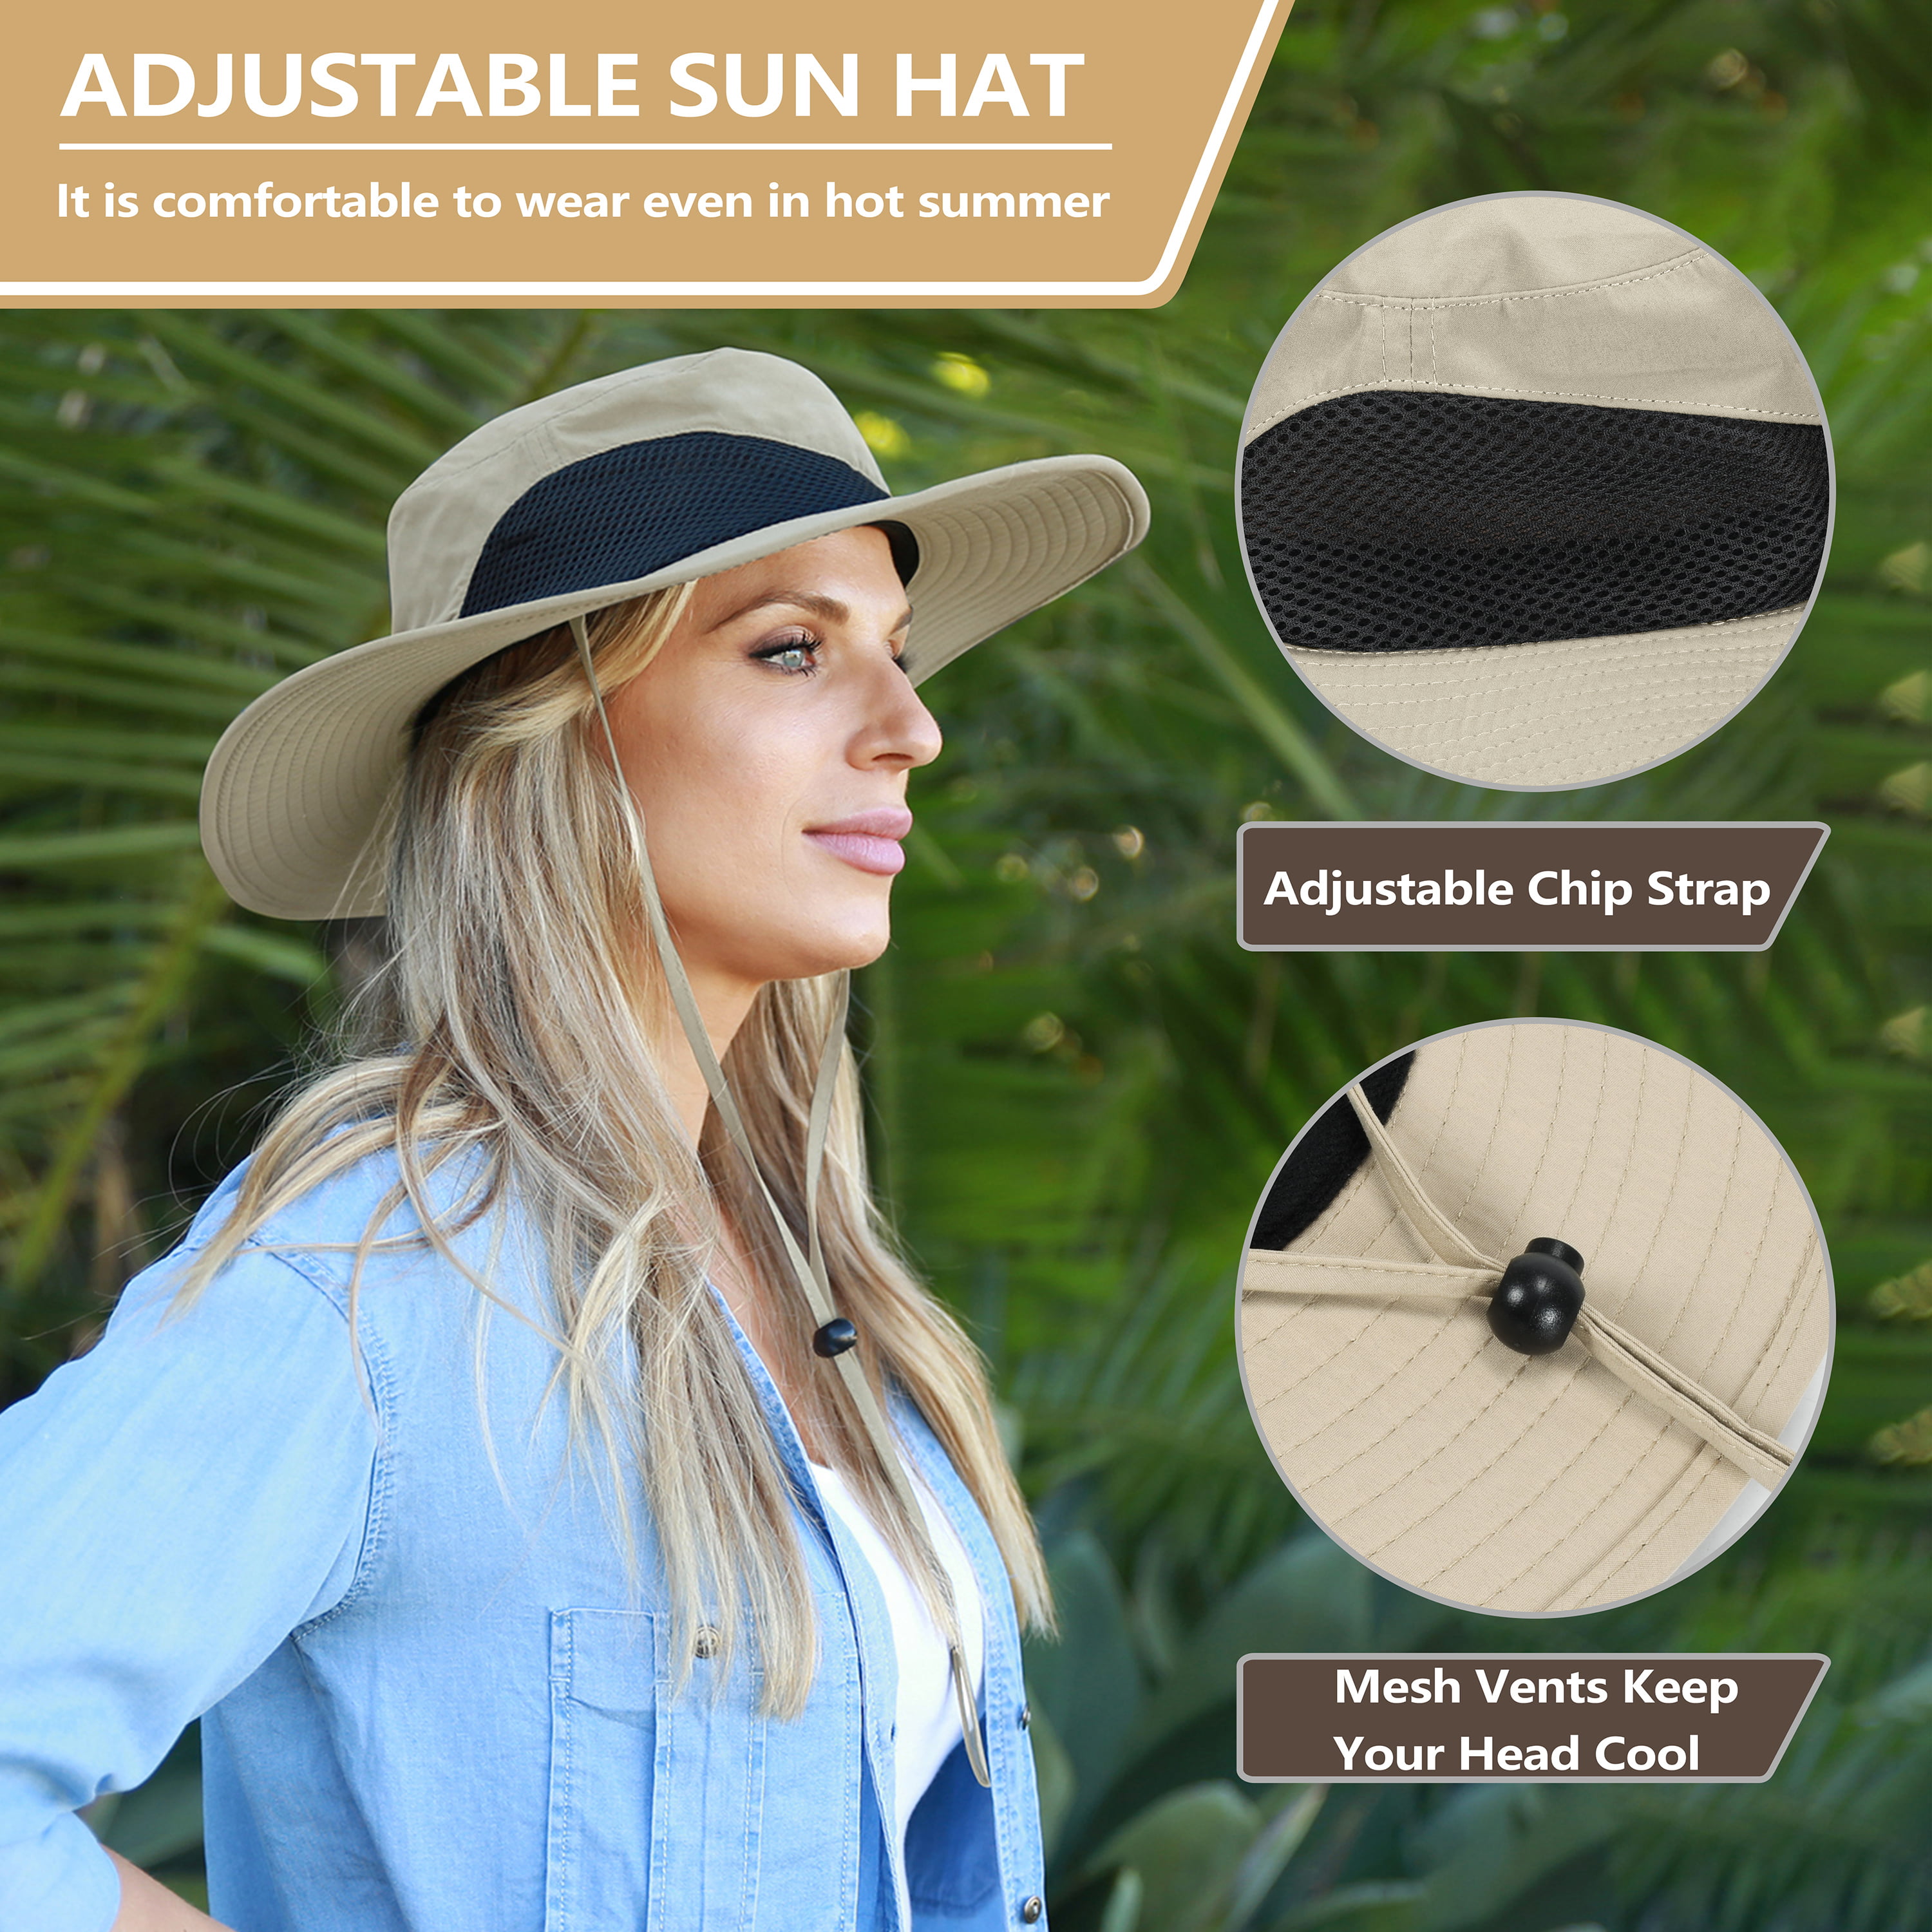 1pc Ladies' Solid Color Vintage Ponytail Hole Baseball Cap For Sun  Protection, Outdoor Activities Such As Hiking, Fishing And Traveling